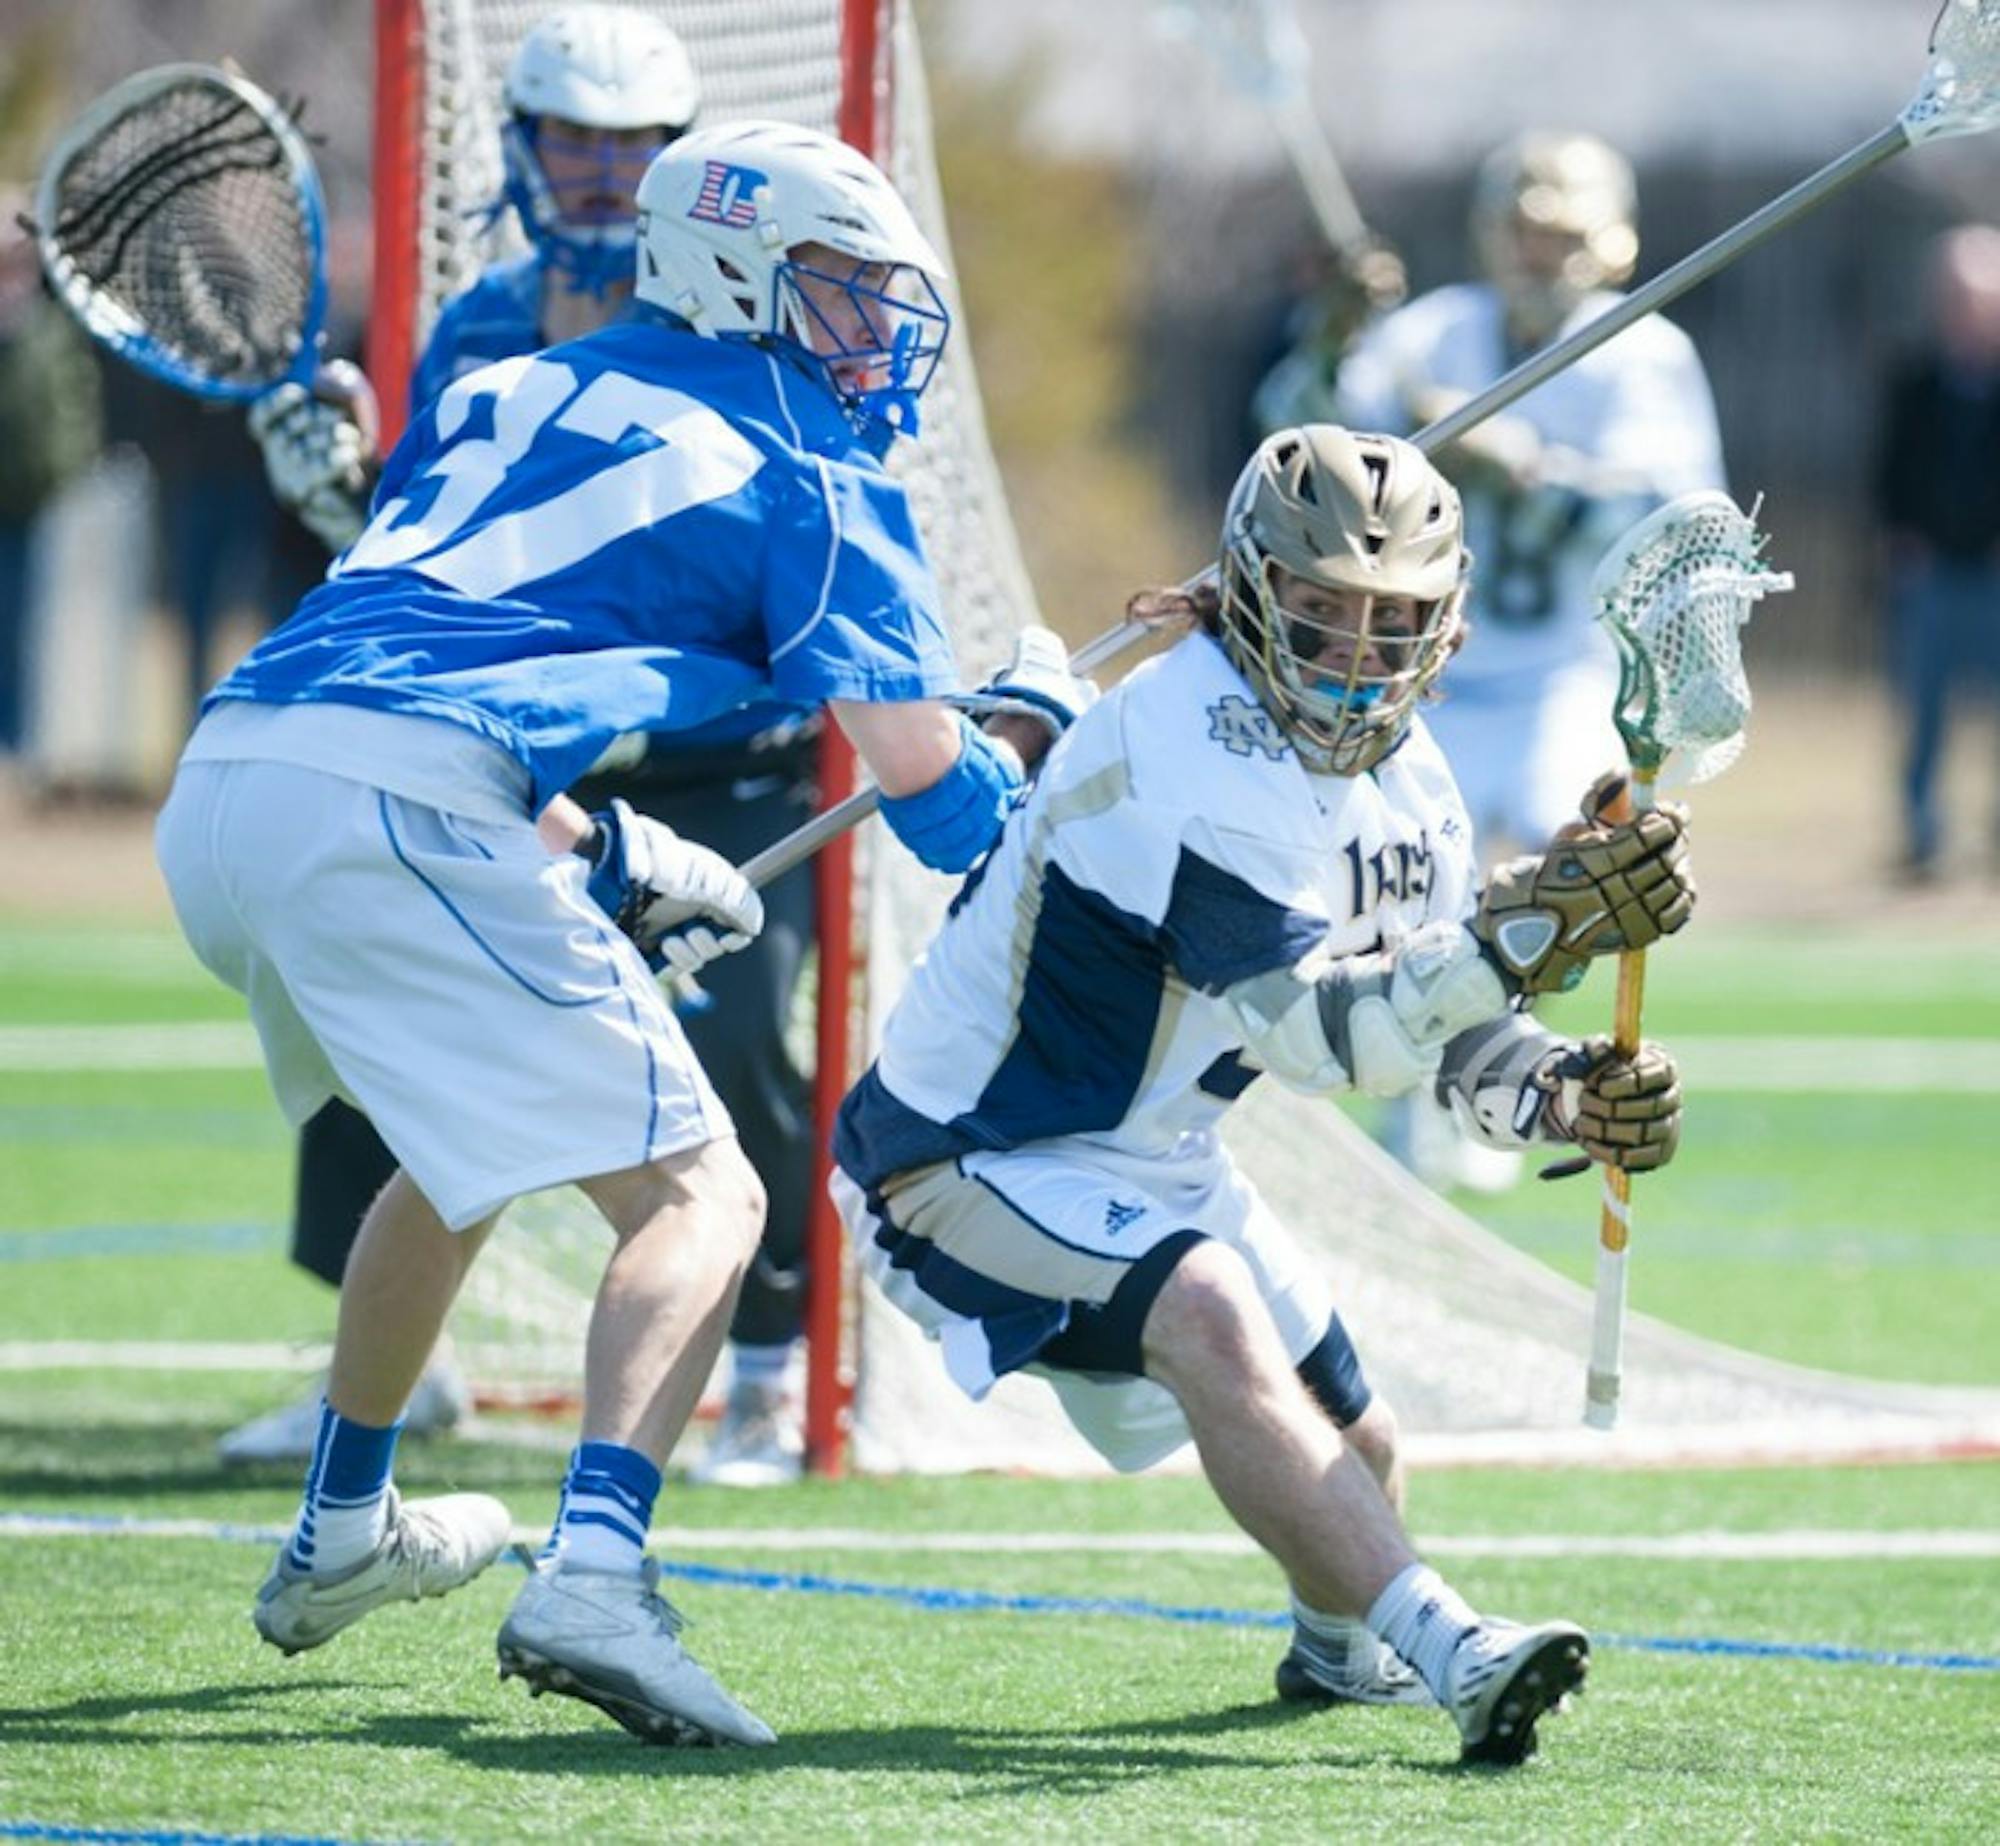 Irish sophomore attackman Matt Kavanagh dodges a Duke defender in Notre Dame’s 15-7 loss at the hands of the Blue Devils. Kavanagh added two goals Tuesday, bringing his season total to a team-high 20.